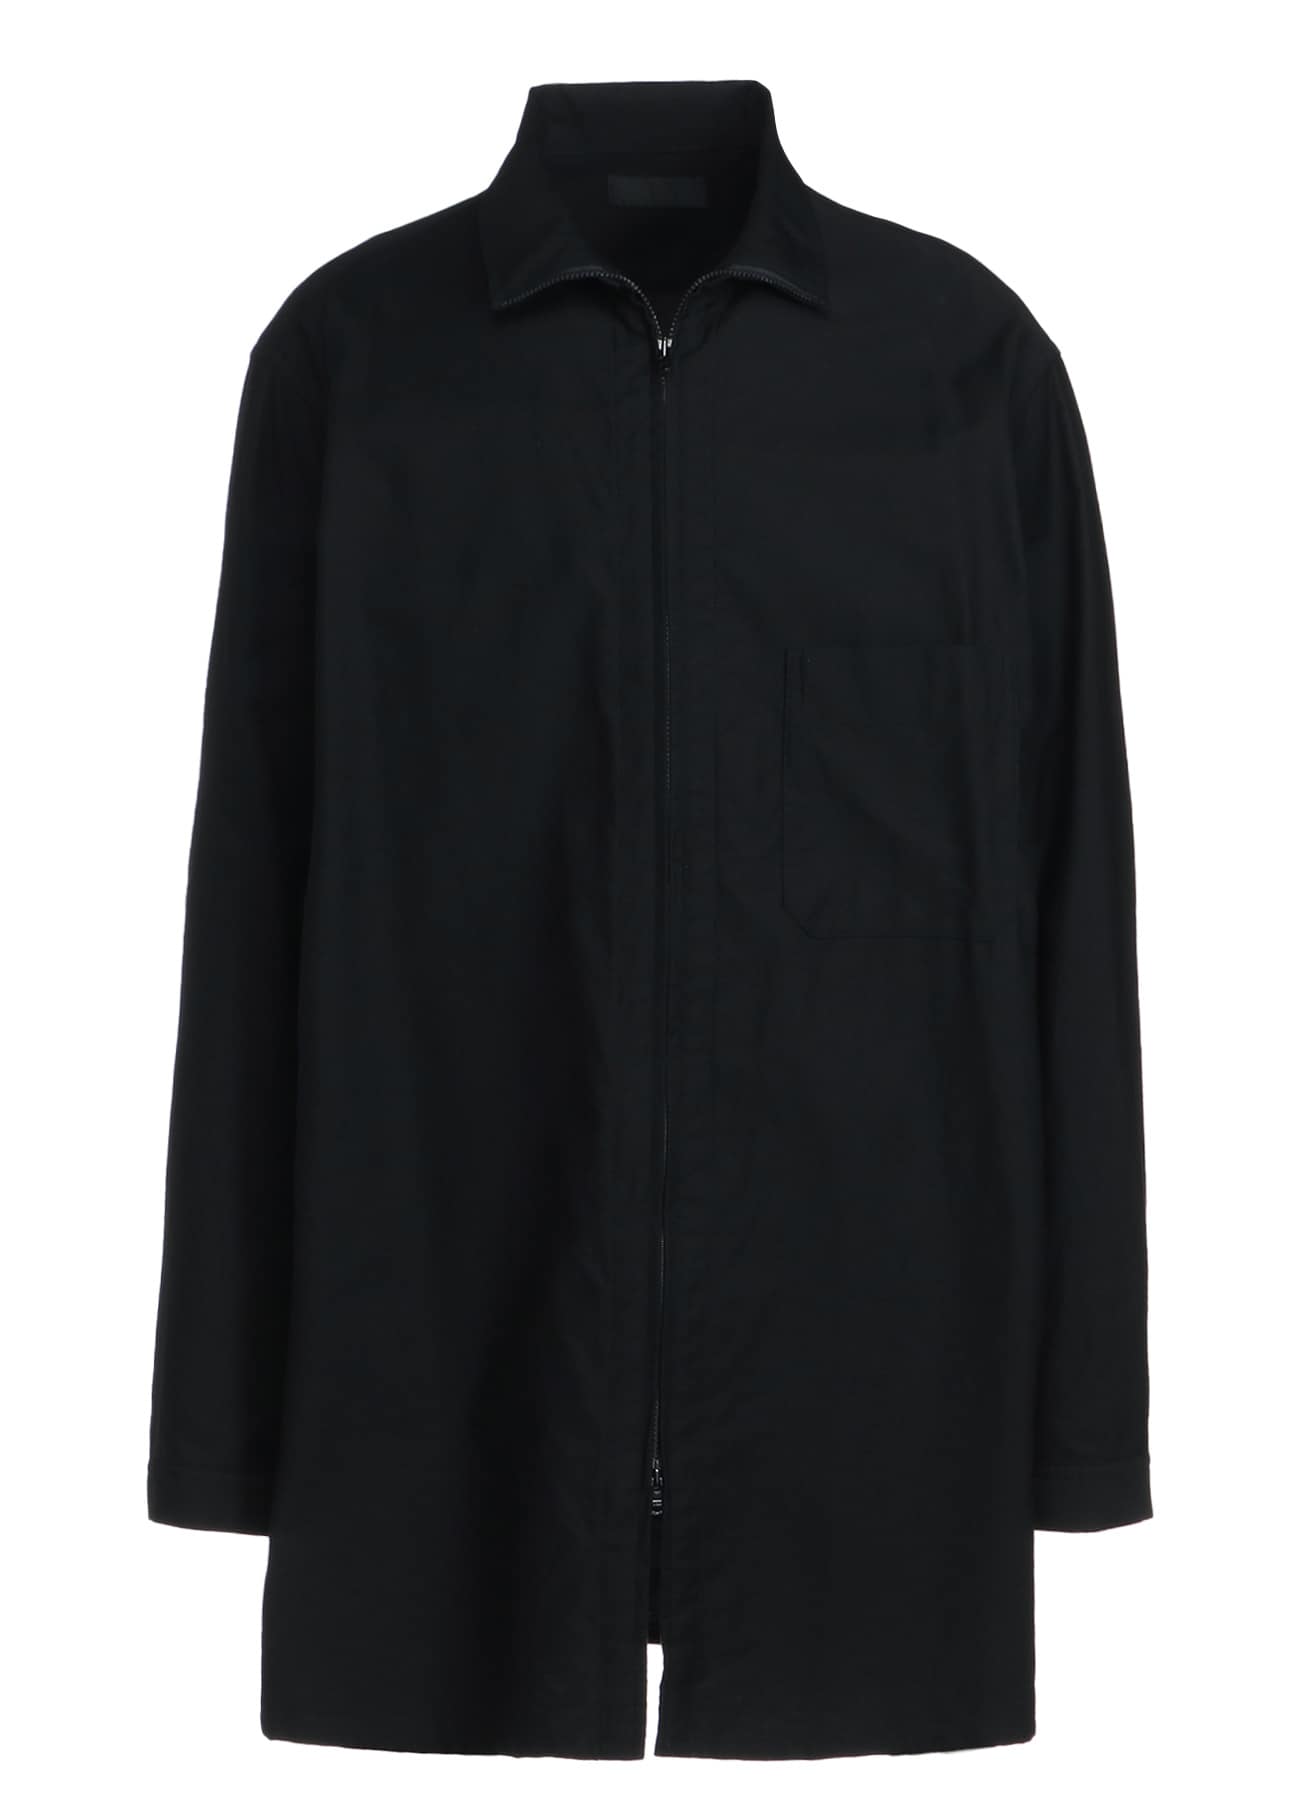 COTTON TWILL STAND COLLAR SHIRTS WITH ZIP DESIGN(M Black): S'YTE 